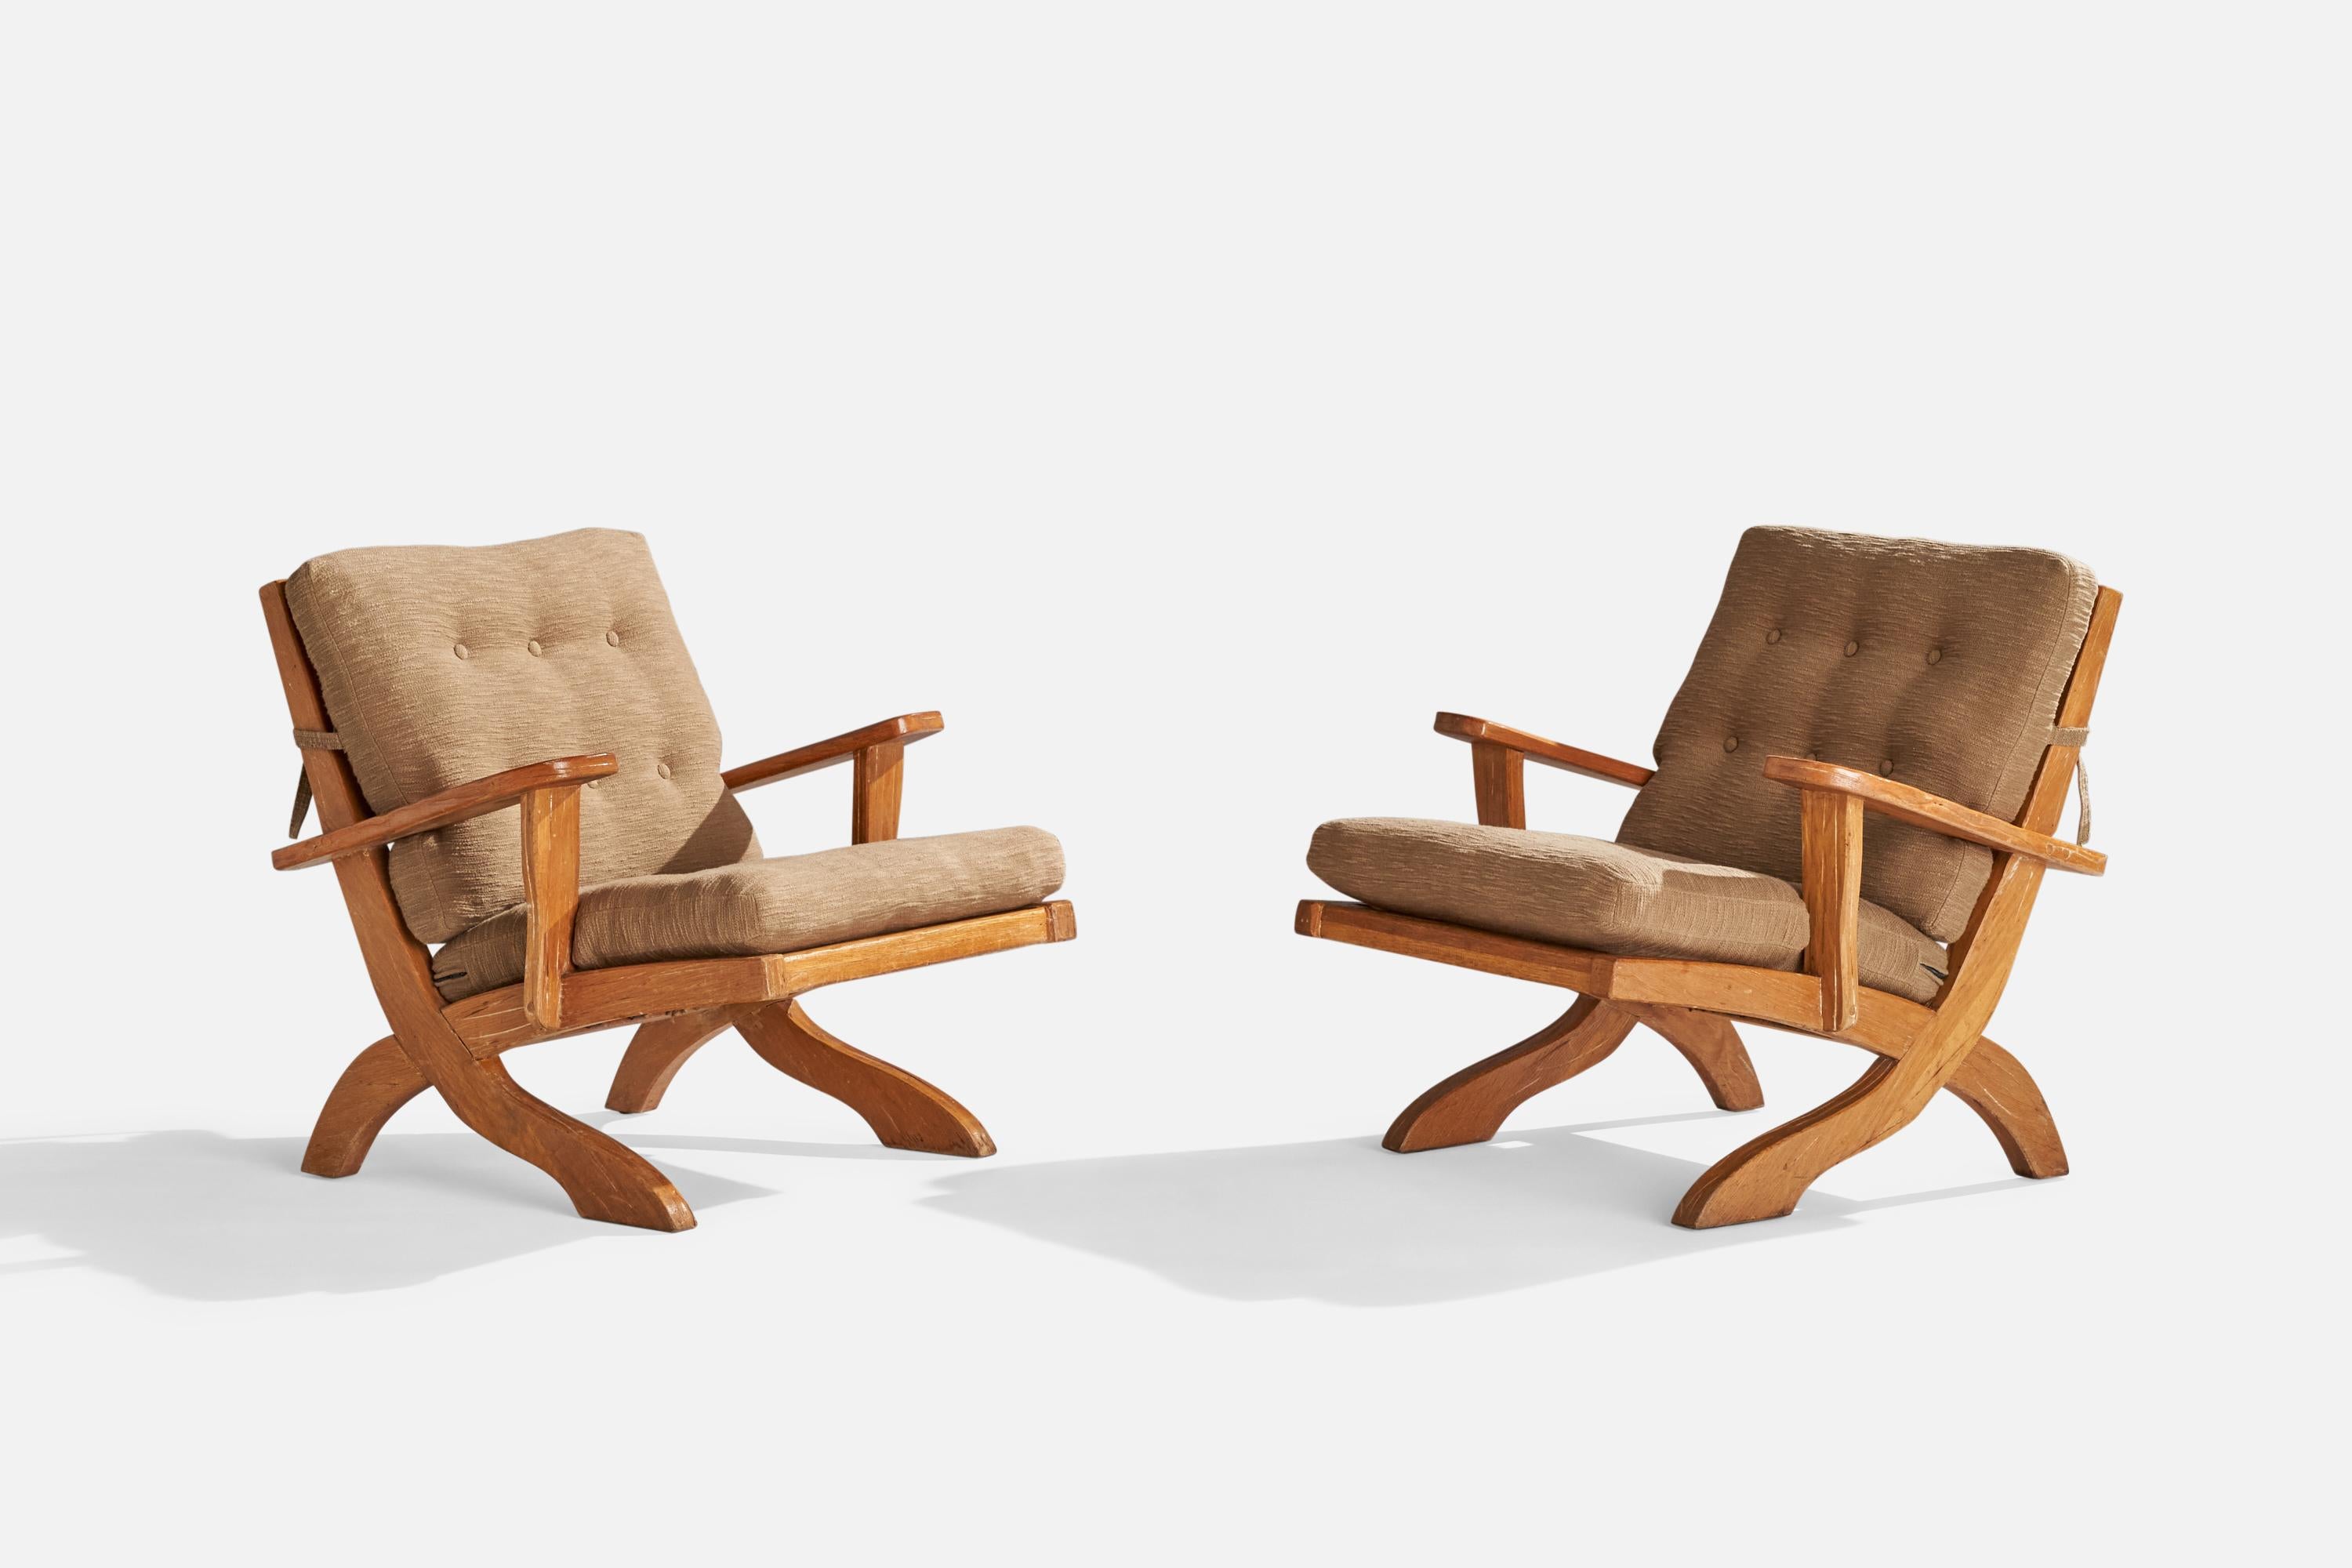 A pair of oak and brown fabric lounge chair designed and produced by A. Brandt Ranch Oak, USA, 1950s.

Seat height 17”.